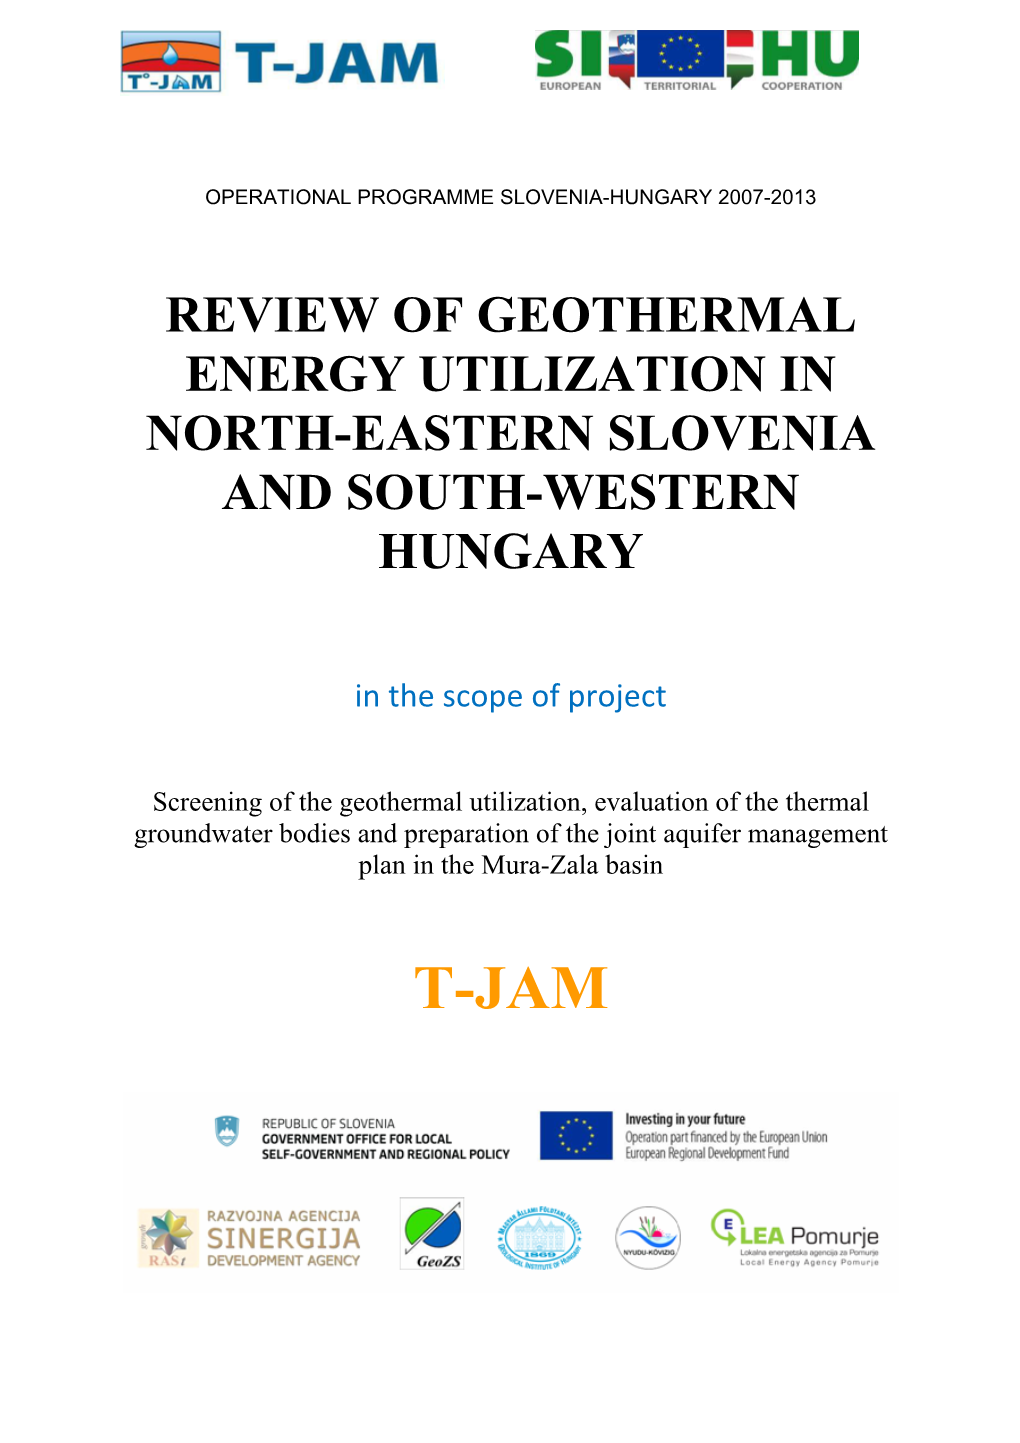 Review of Geothermal Energy Utilization in North-Eastern Slovenia and South-Western Hungary